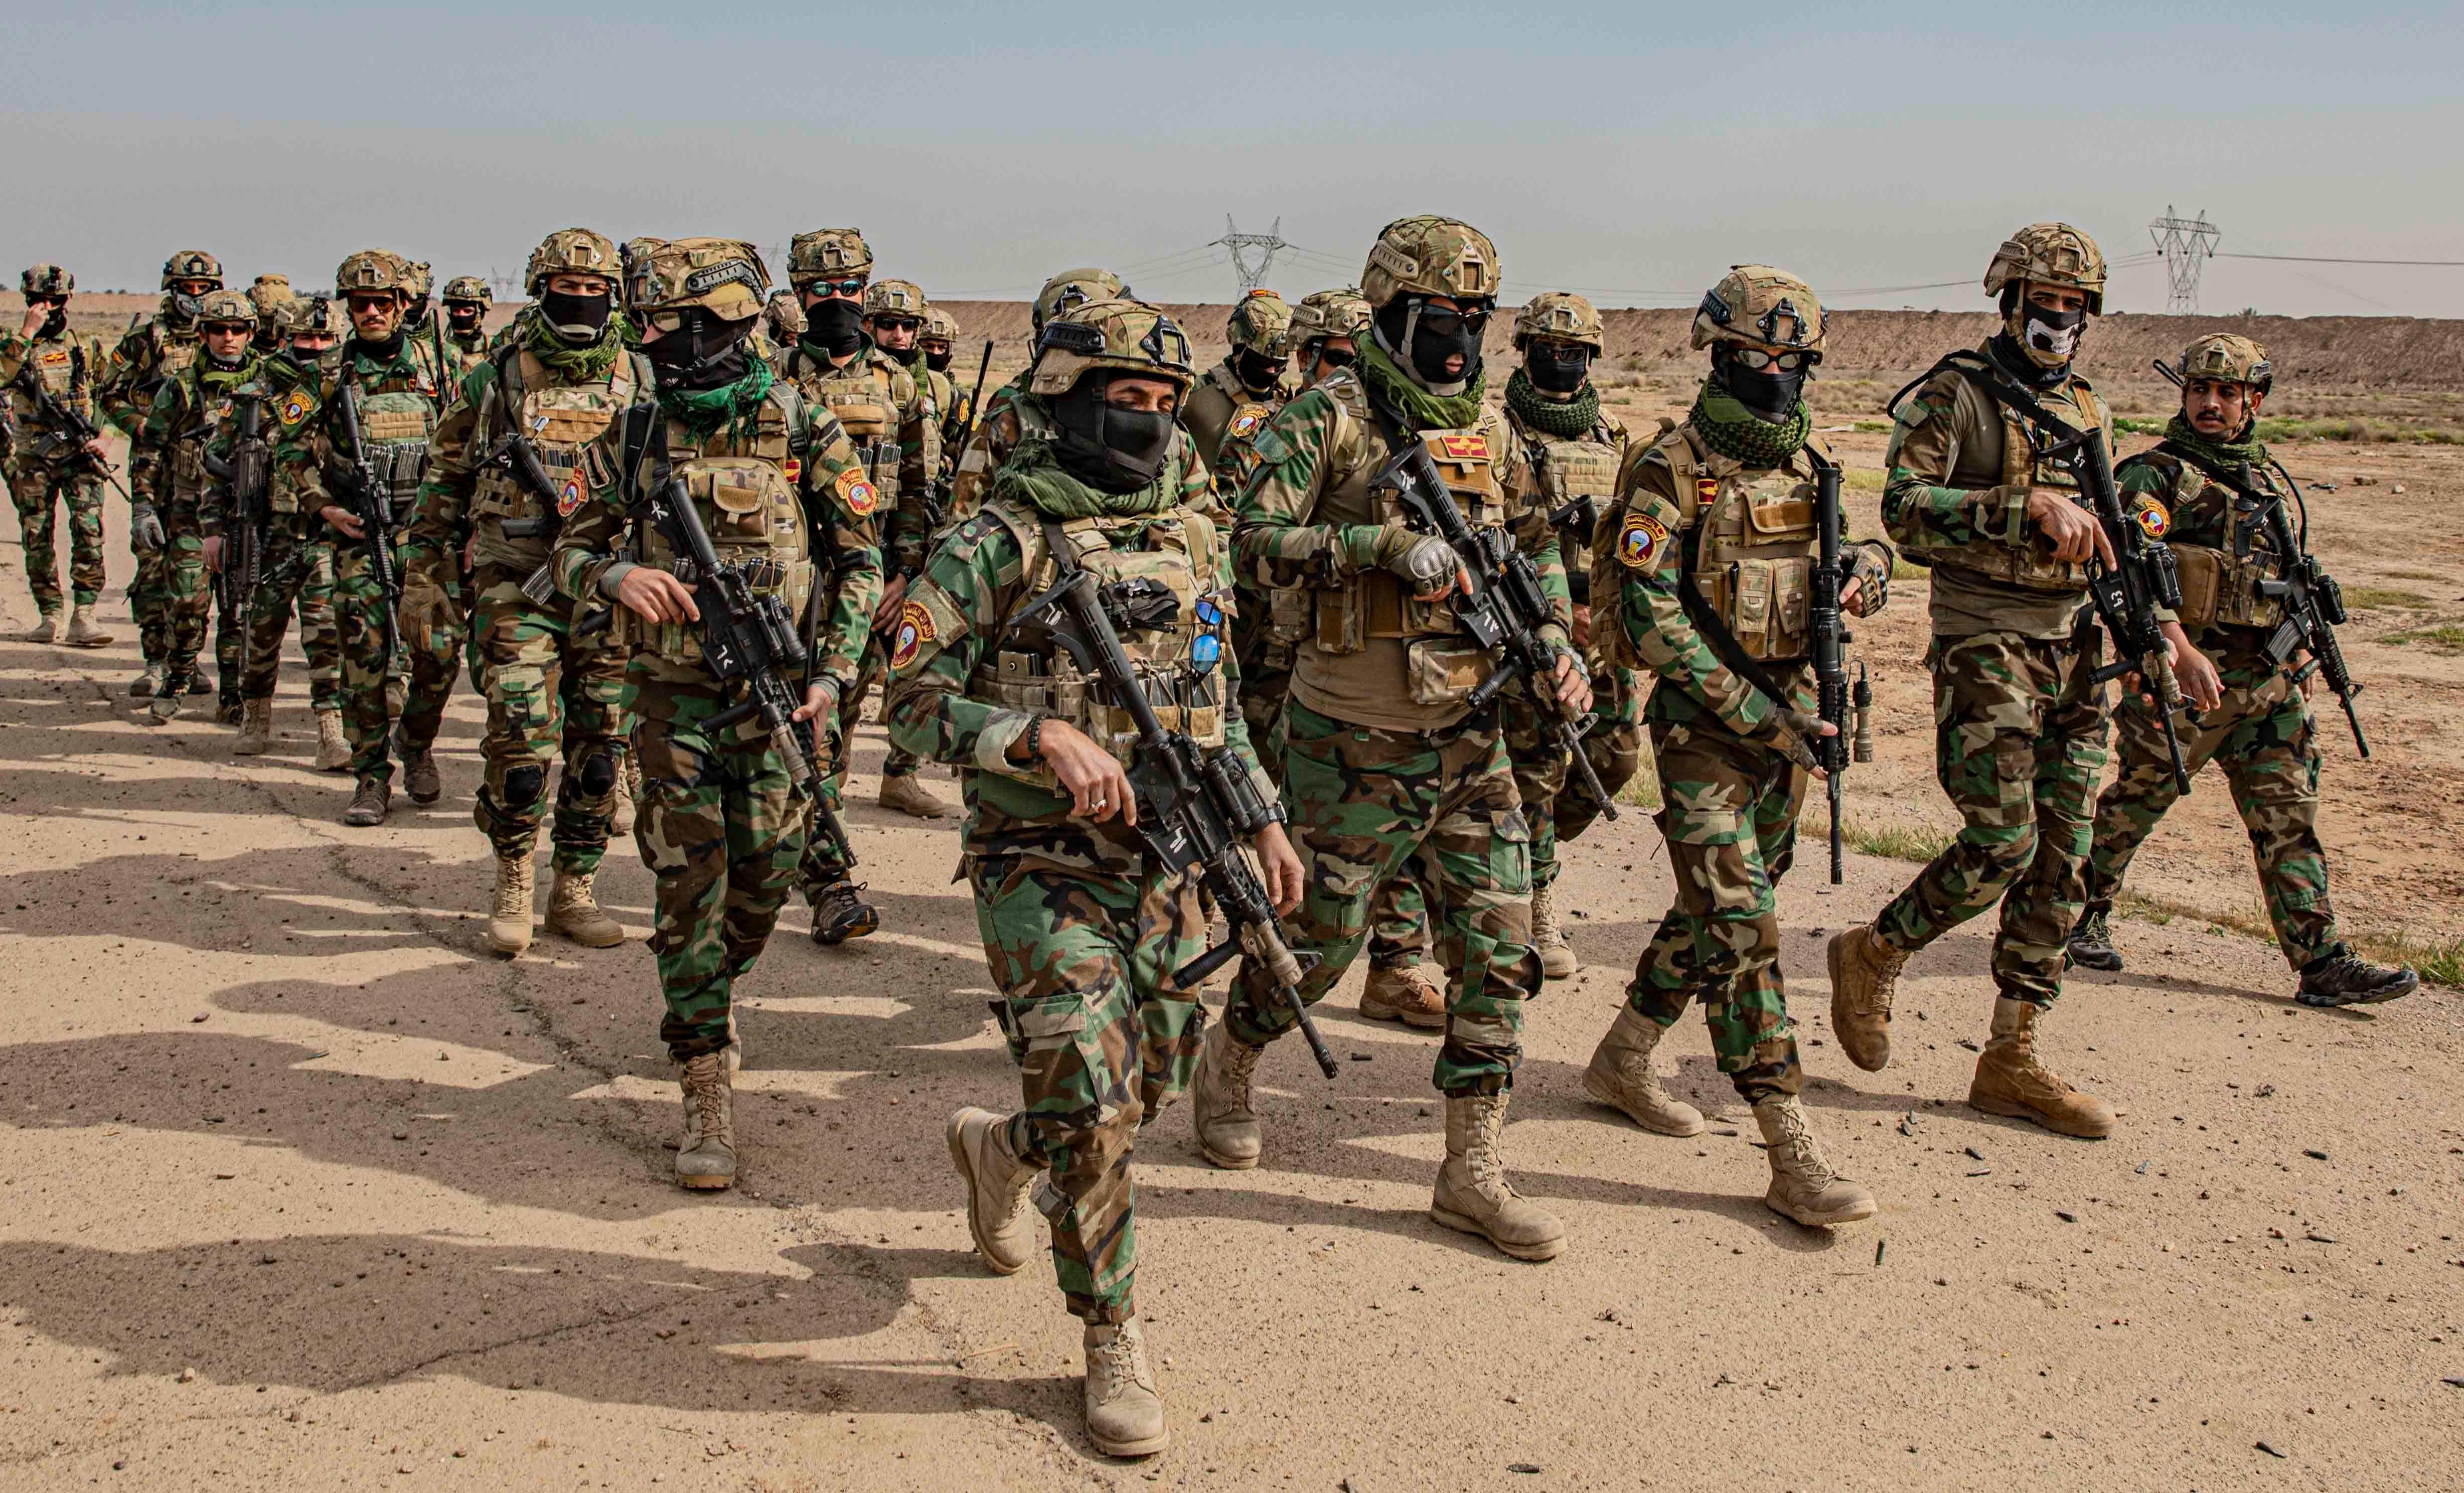 Soliders with Qwat al Khasah, the Special Forces of Iraq, march in formation as they take part in training for an upcoming mission at Camp Taji, Iraq March 7, 2020. The Qwat al Khasah, Special Forces of Iraq, are leading a coalition of nations in the fight against Daesh by interrupting enemy operations to continue the further stabilization of Iraq. (U.S. Army photo by Sgt. Robert Douglas).